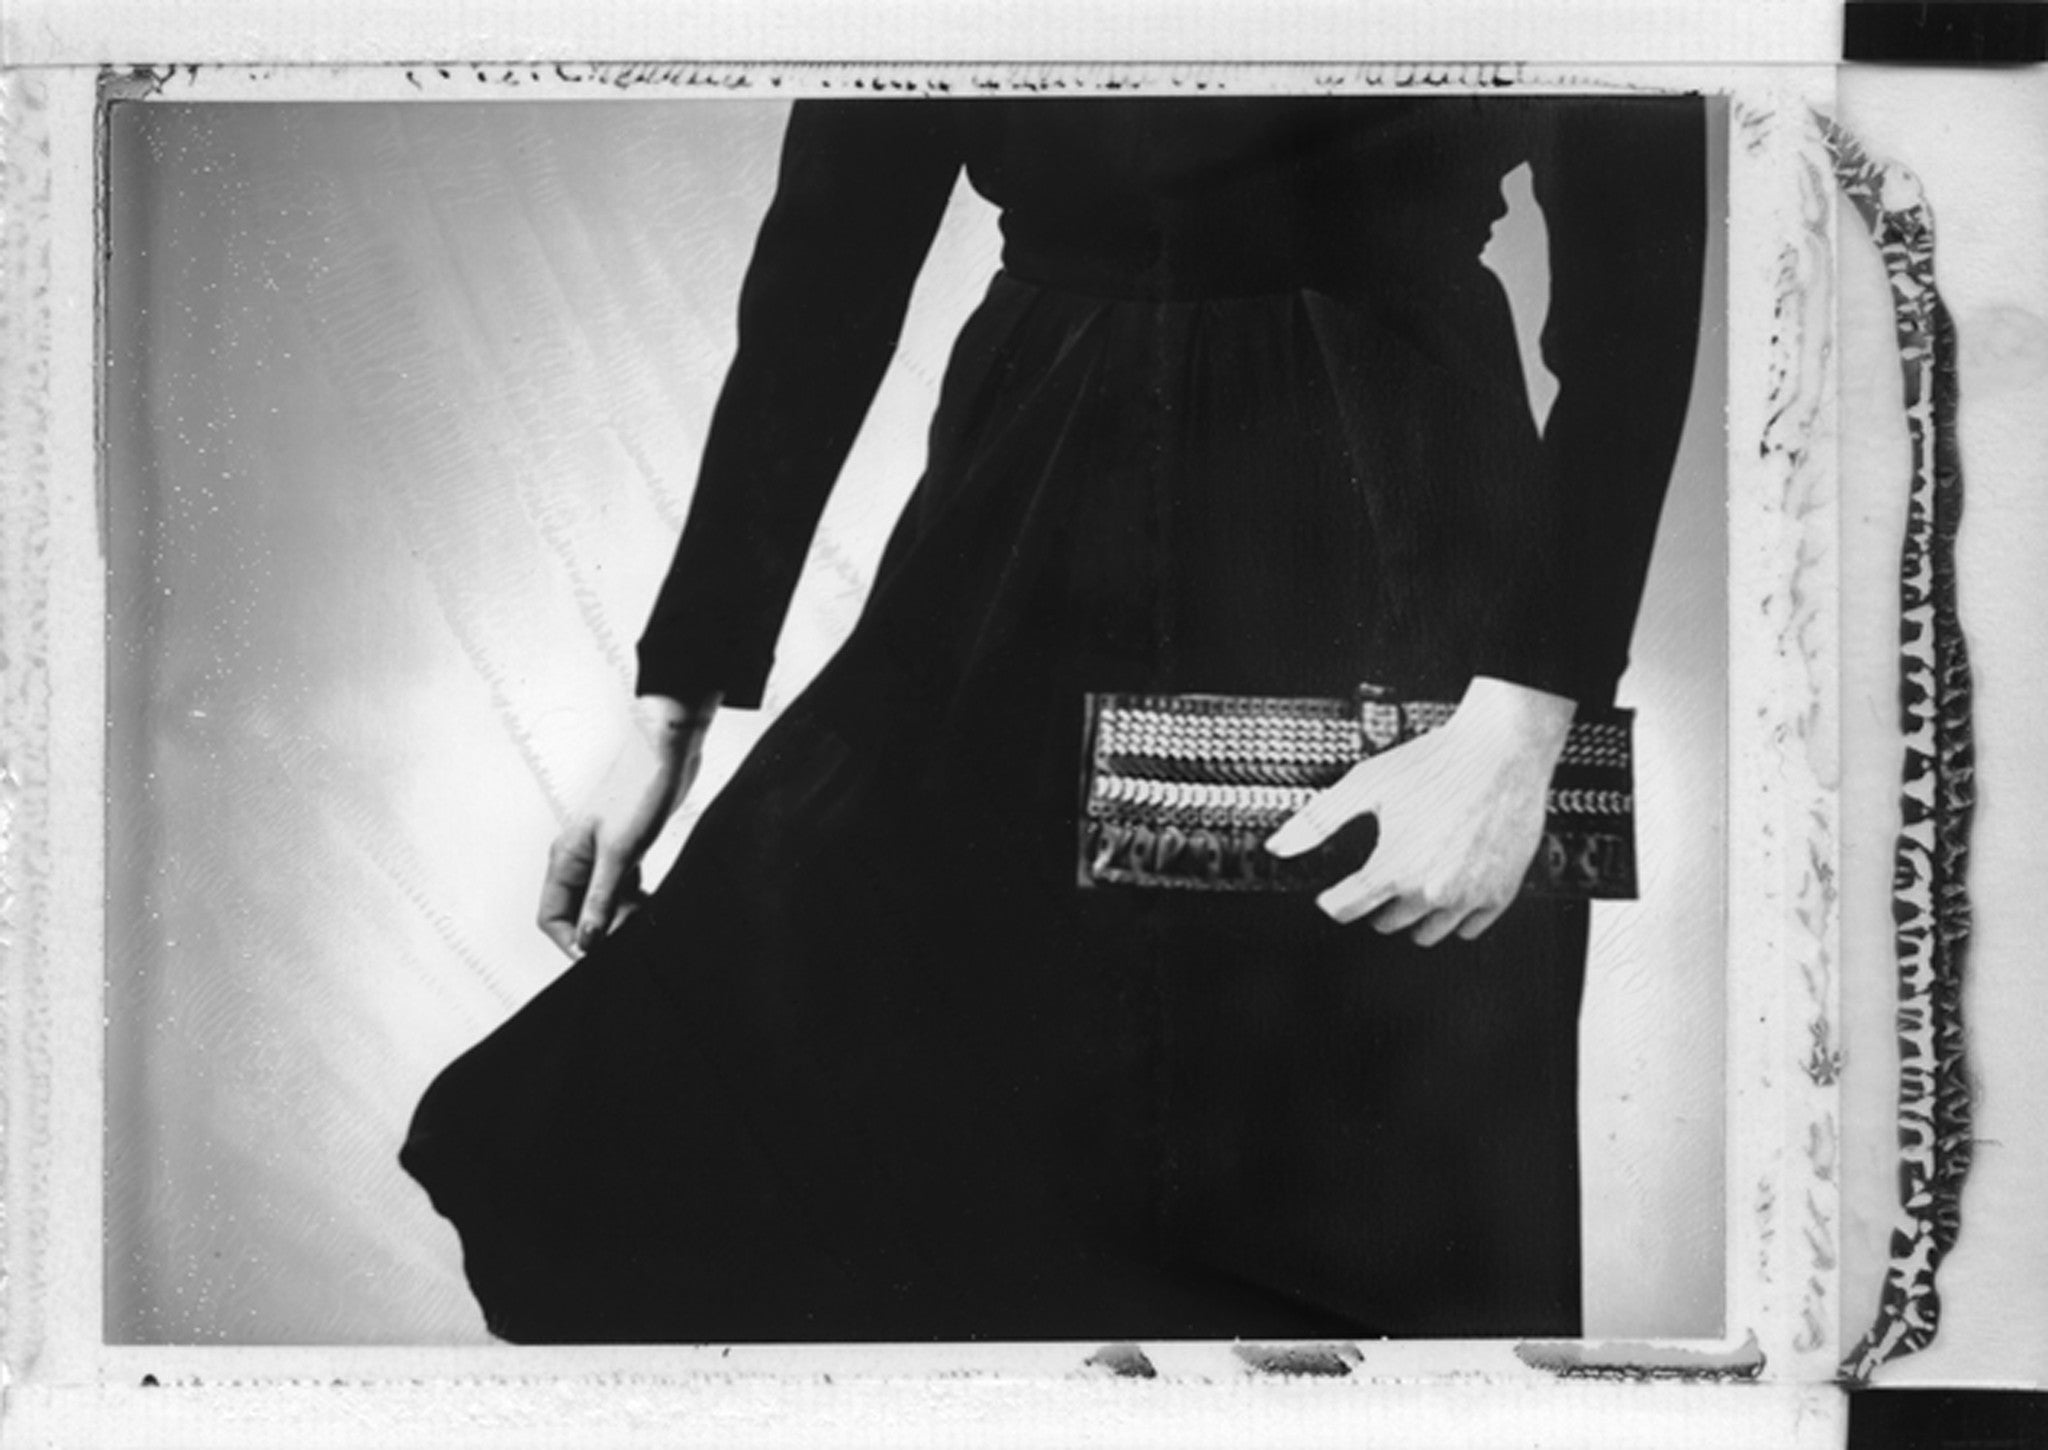 Woven Leather "ONNA" Clutch Bag